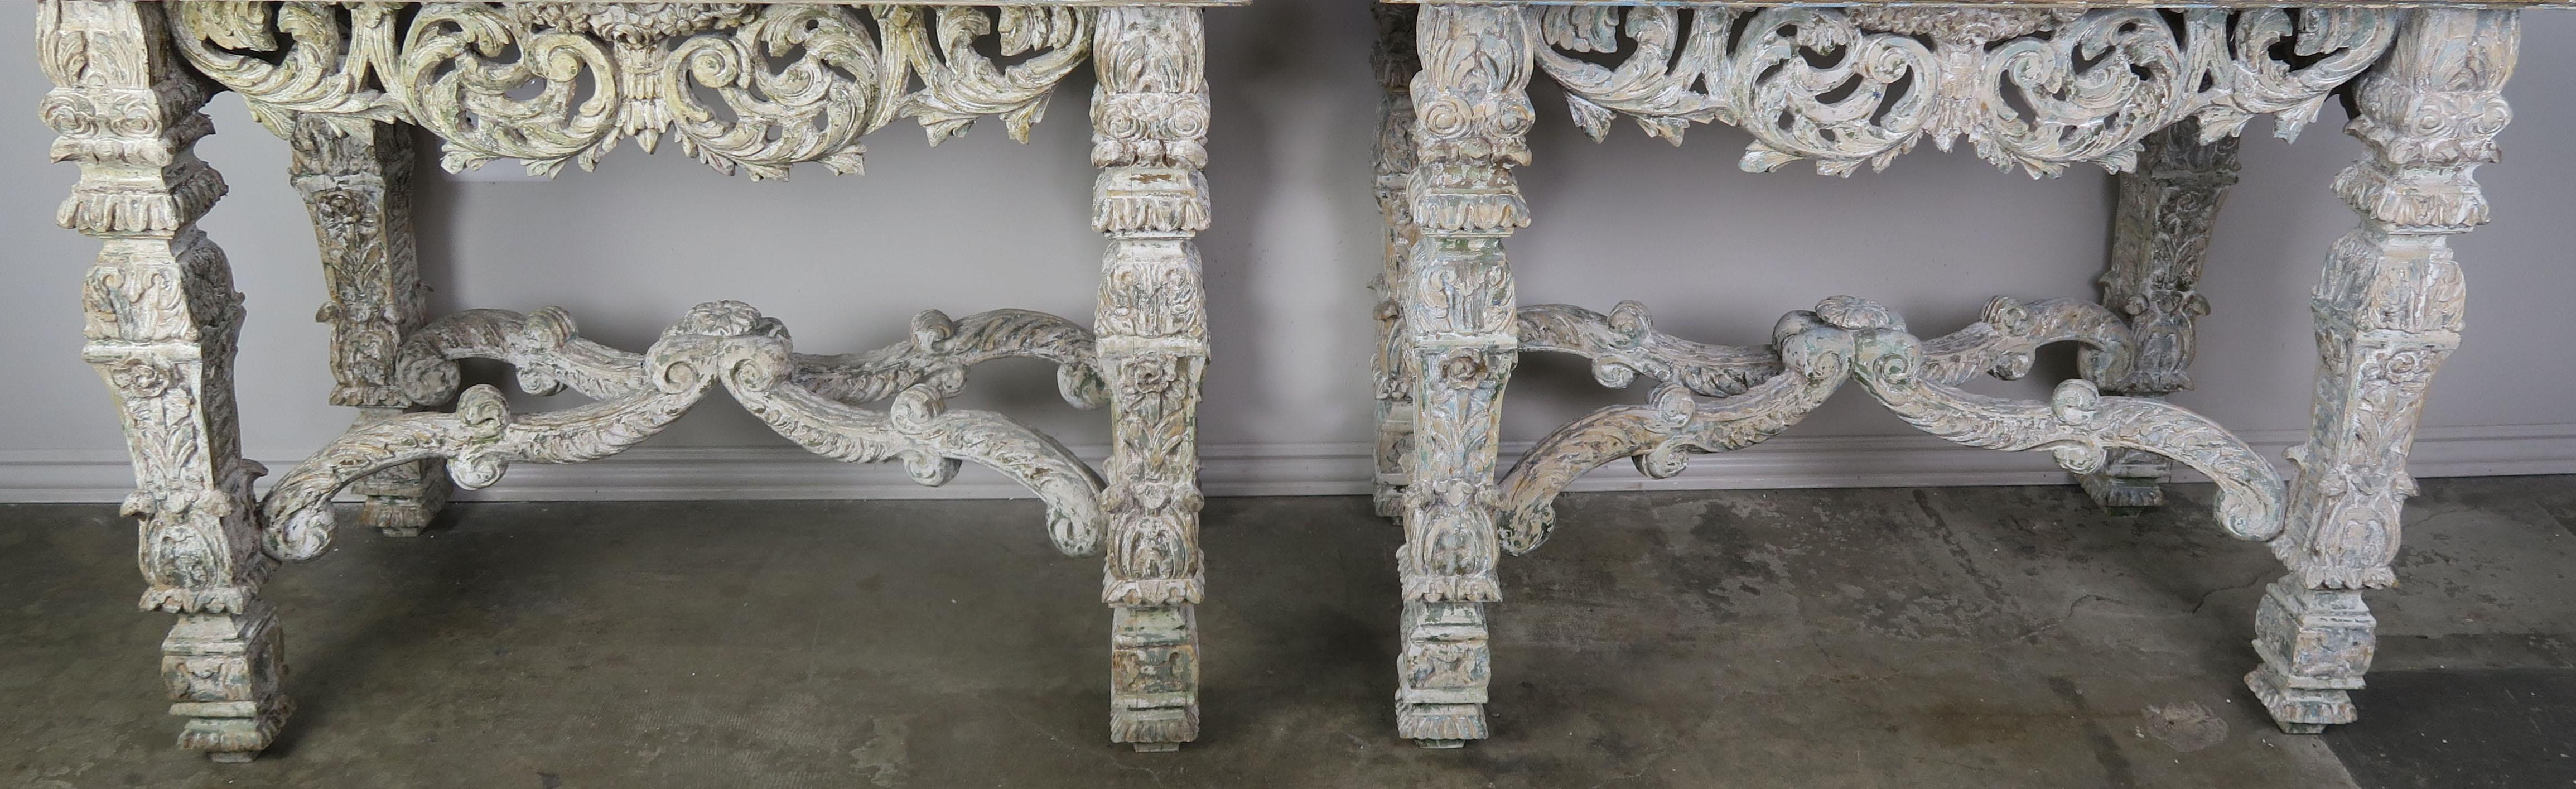 Baroque Italian Painted Consoles with Black Marble Tops, Pair